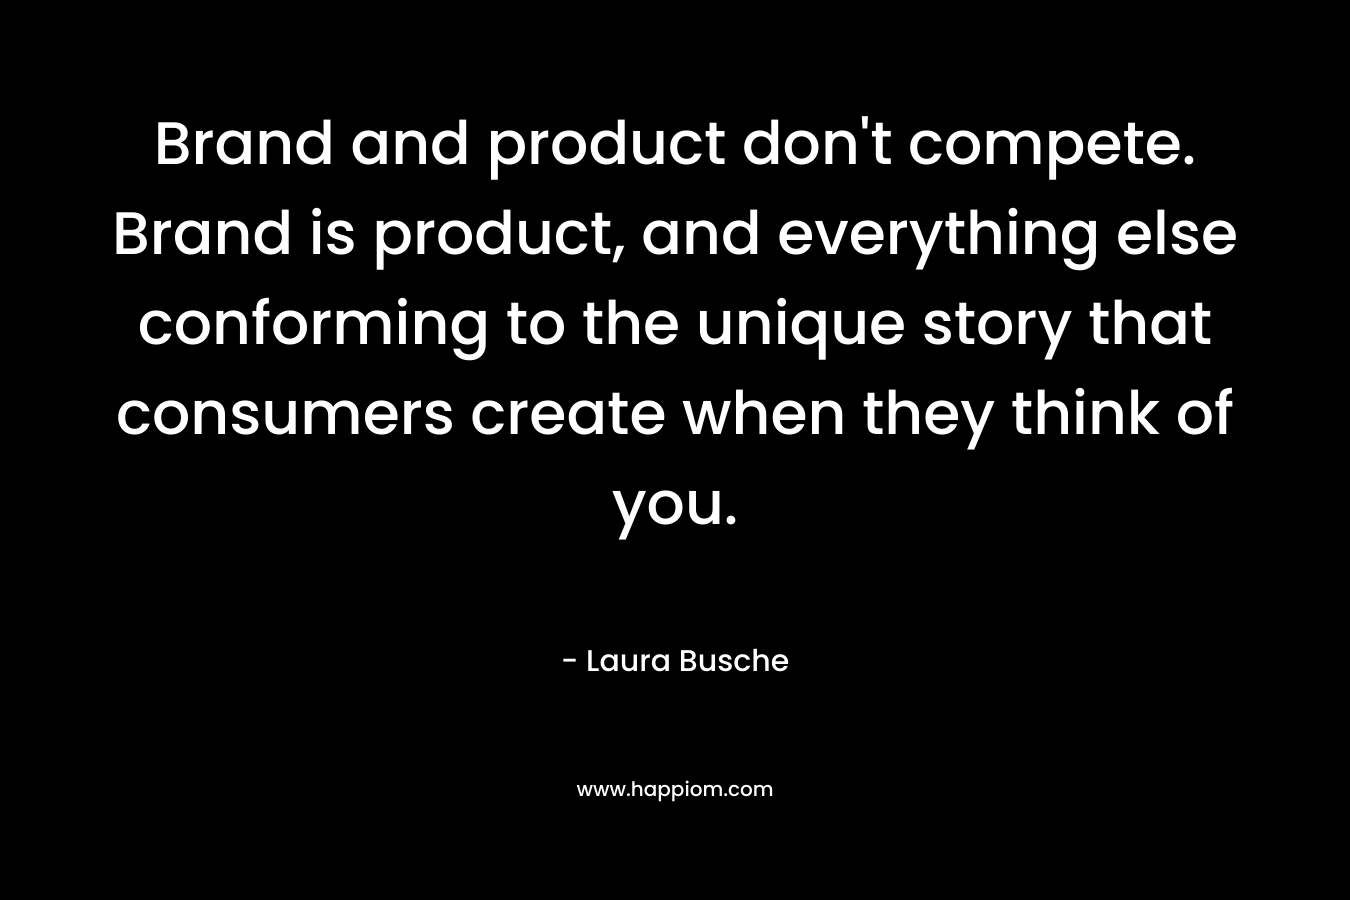 Brand and product don’t compete. Brand is product, and everything else conforming to the unique story that consumers create when they think of you. – Laura Busche